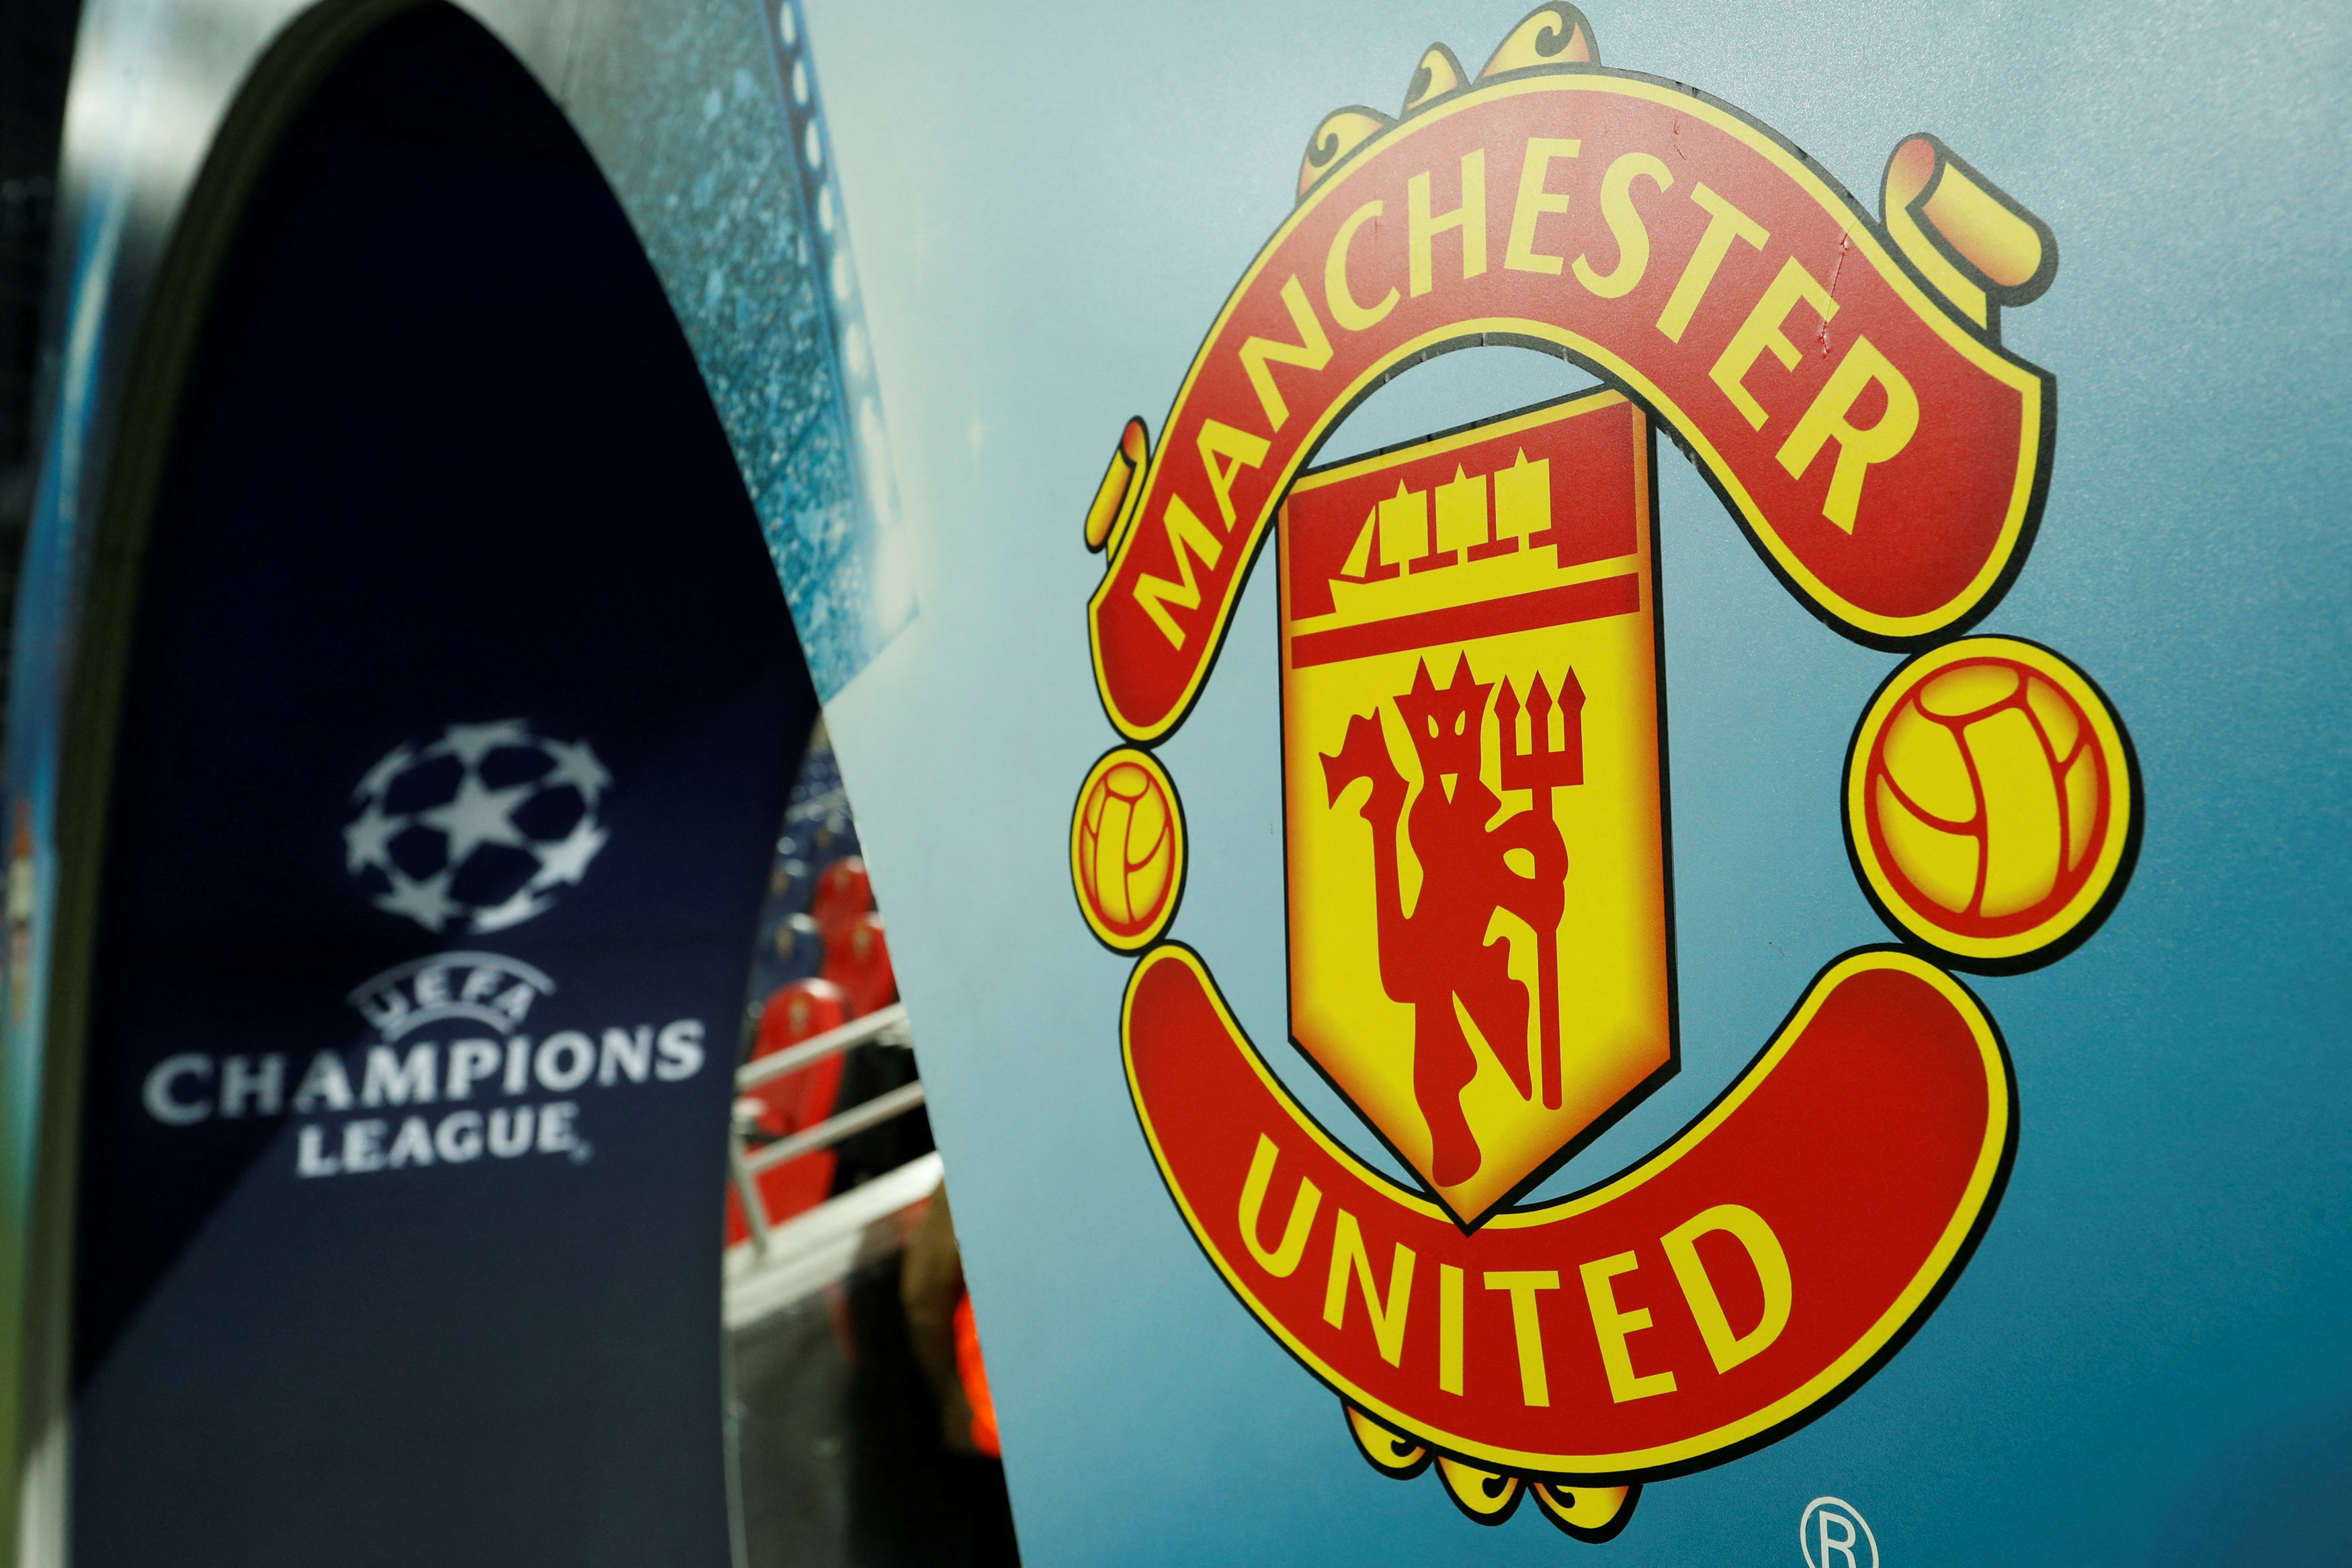 Champions League - CSKA Moscow vs Manchester United